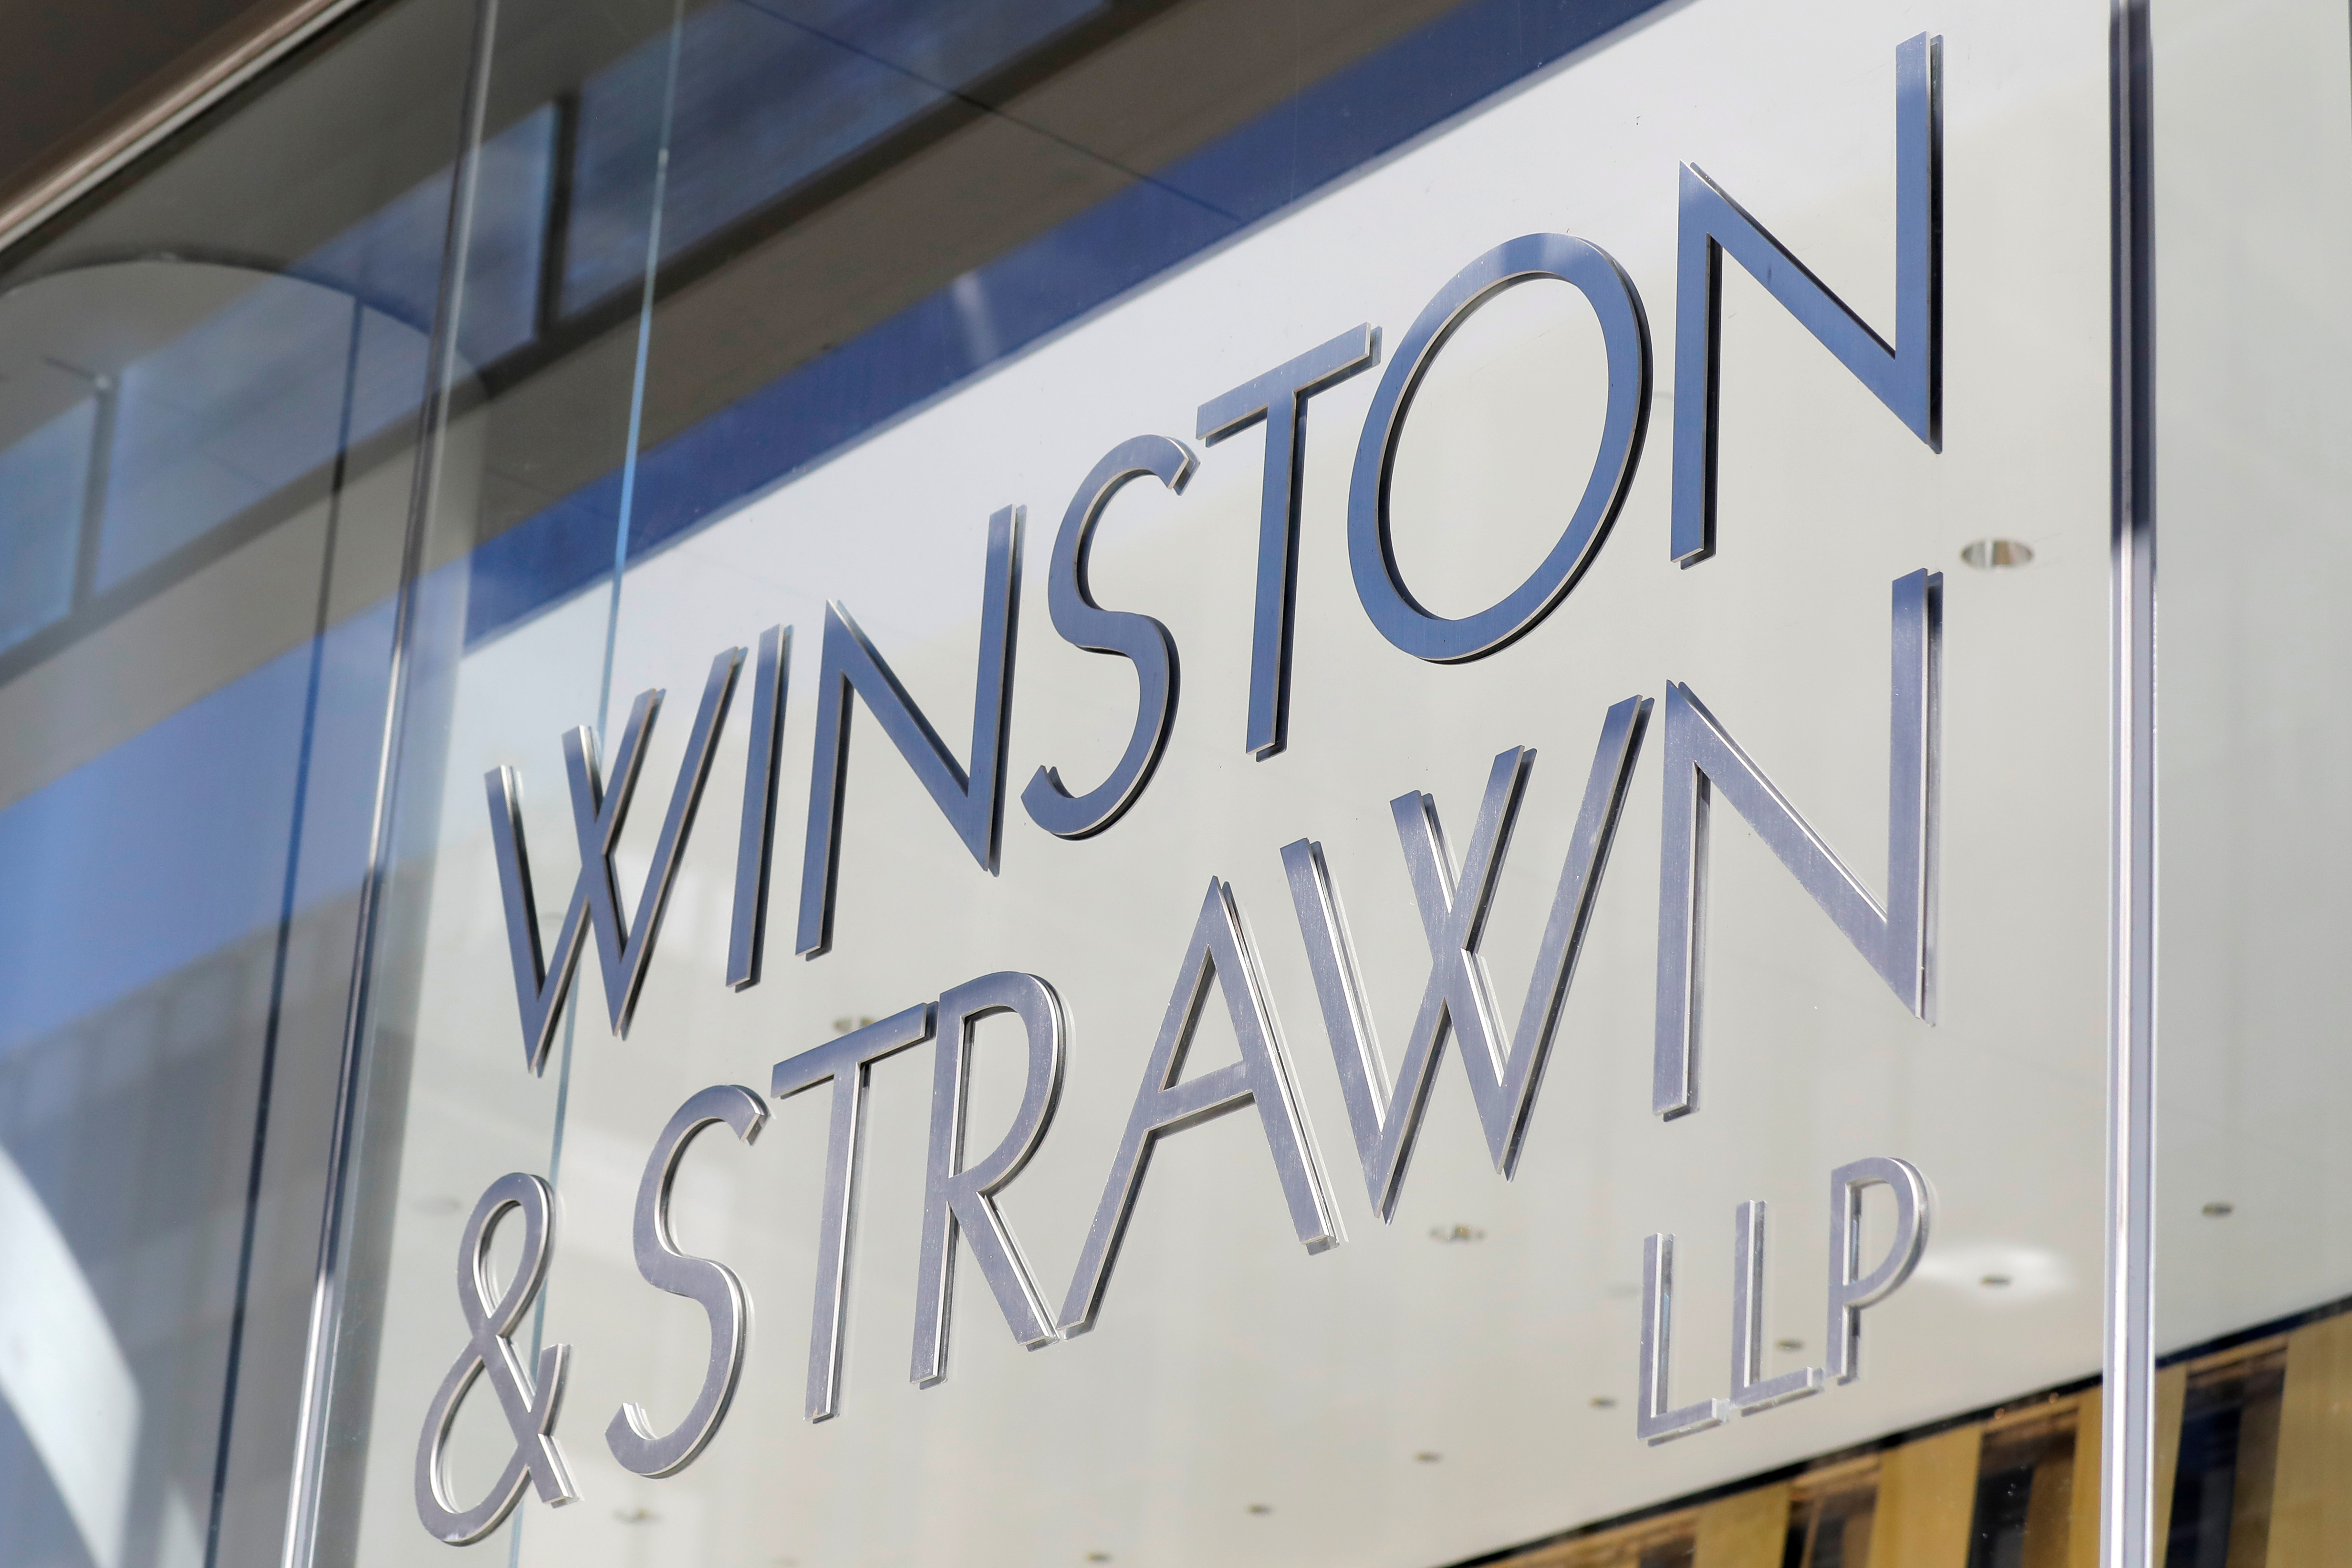 Signage is seen outside of the law firm Winston & Strawn LLP in Washington, D.C.